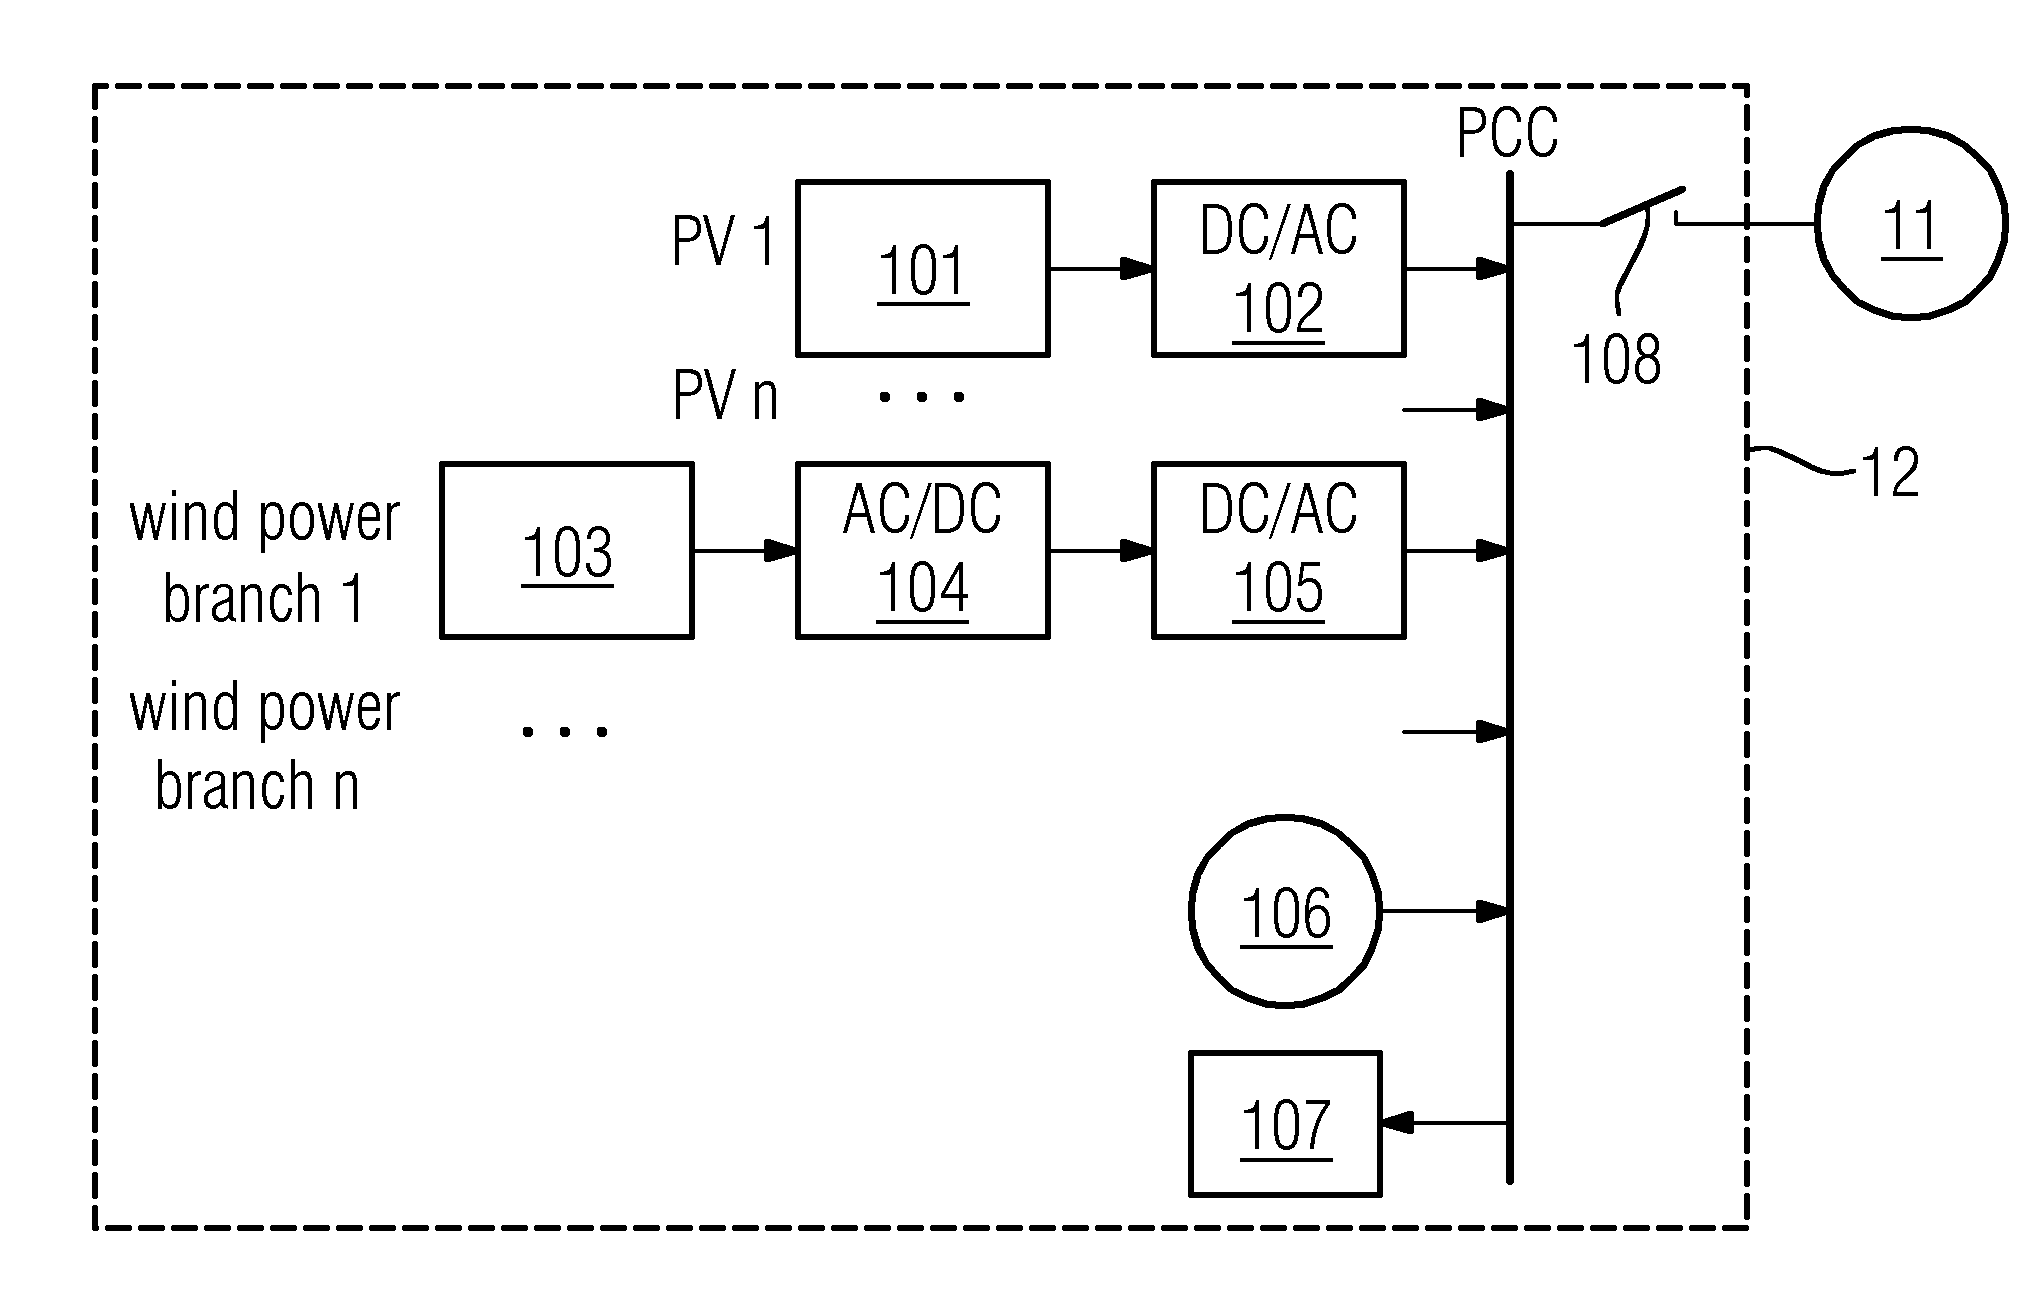 Power generation unit driver, power generation unit and energy output equipment in power grid